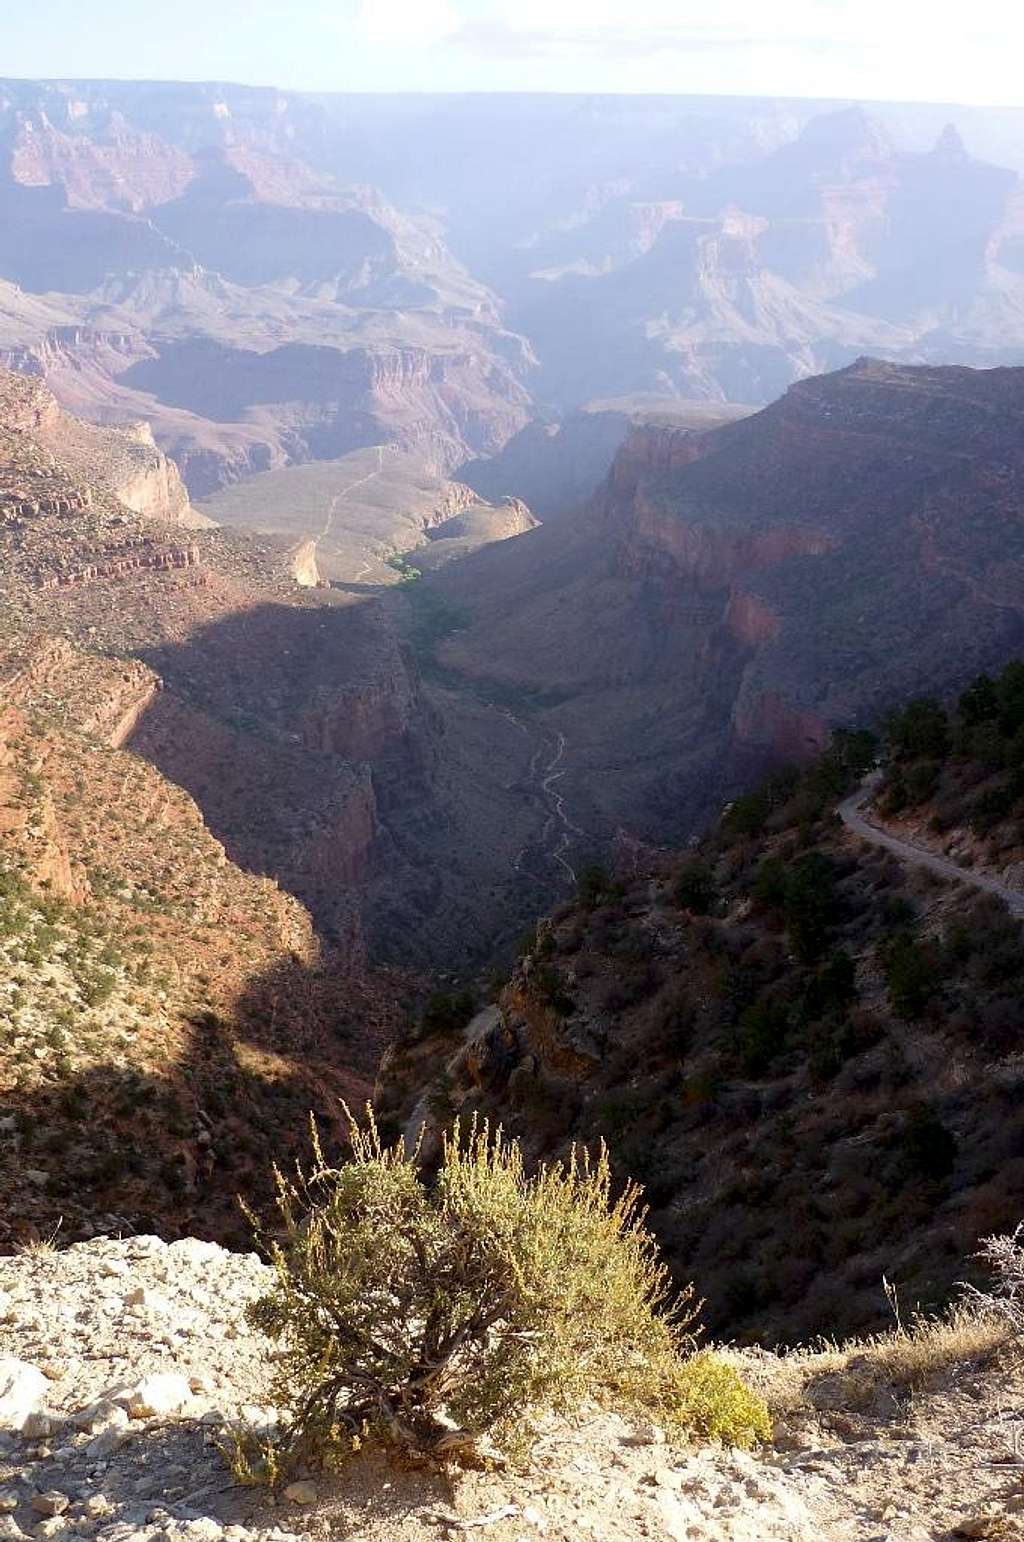 View of the trail from just below the rim